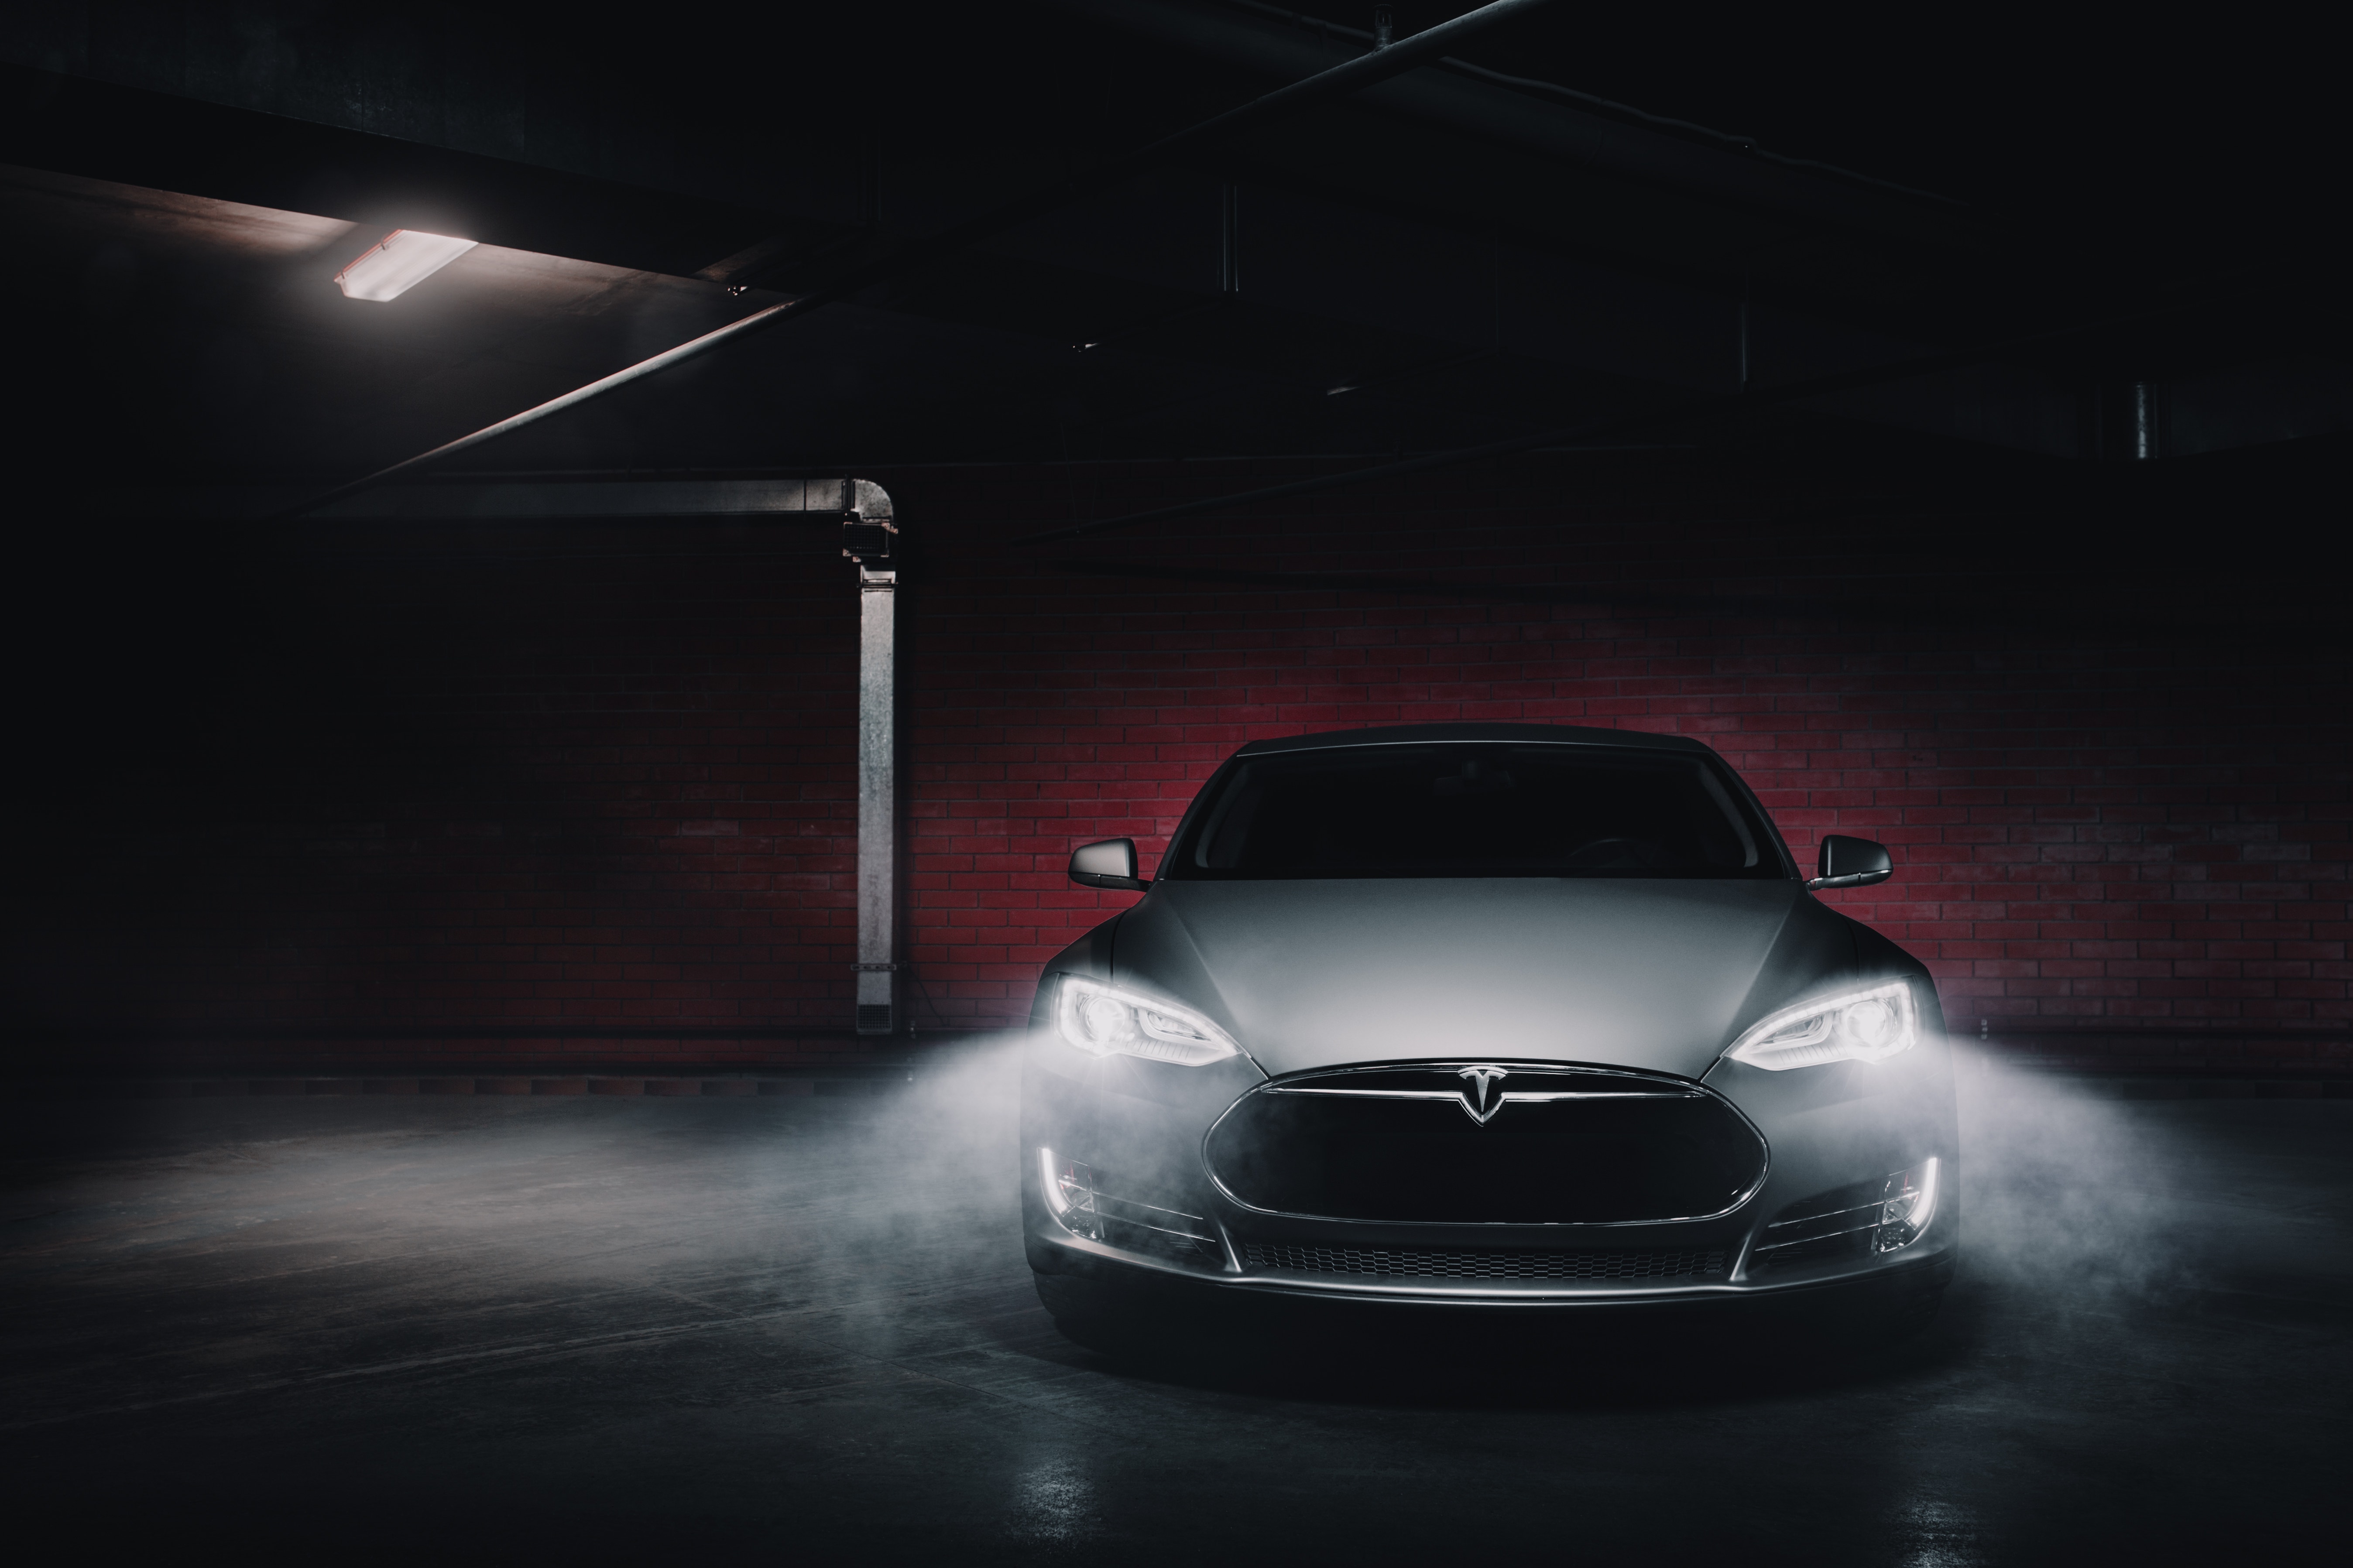 Tesla Owners, Beware: Your EV Can Be Stolen With This $20 Device, Here's How To Safeguard it